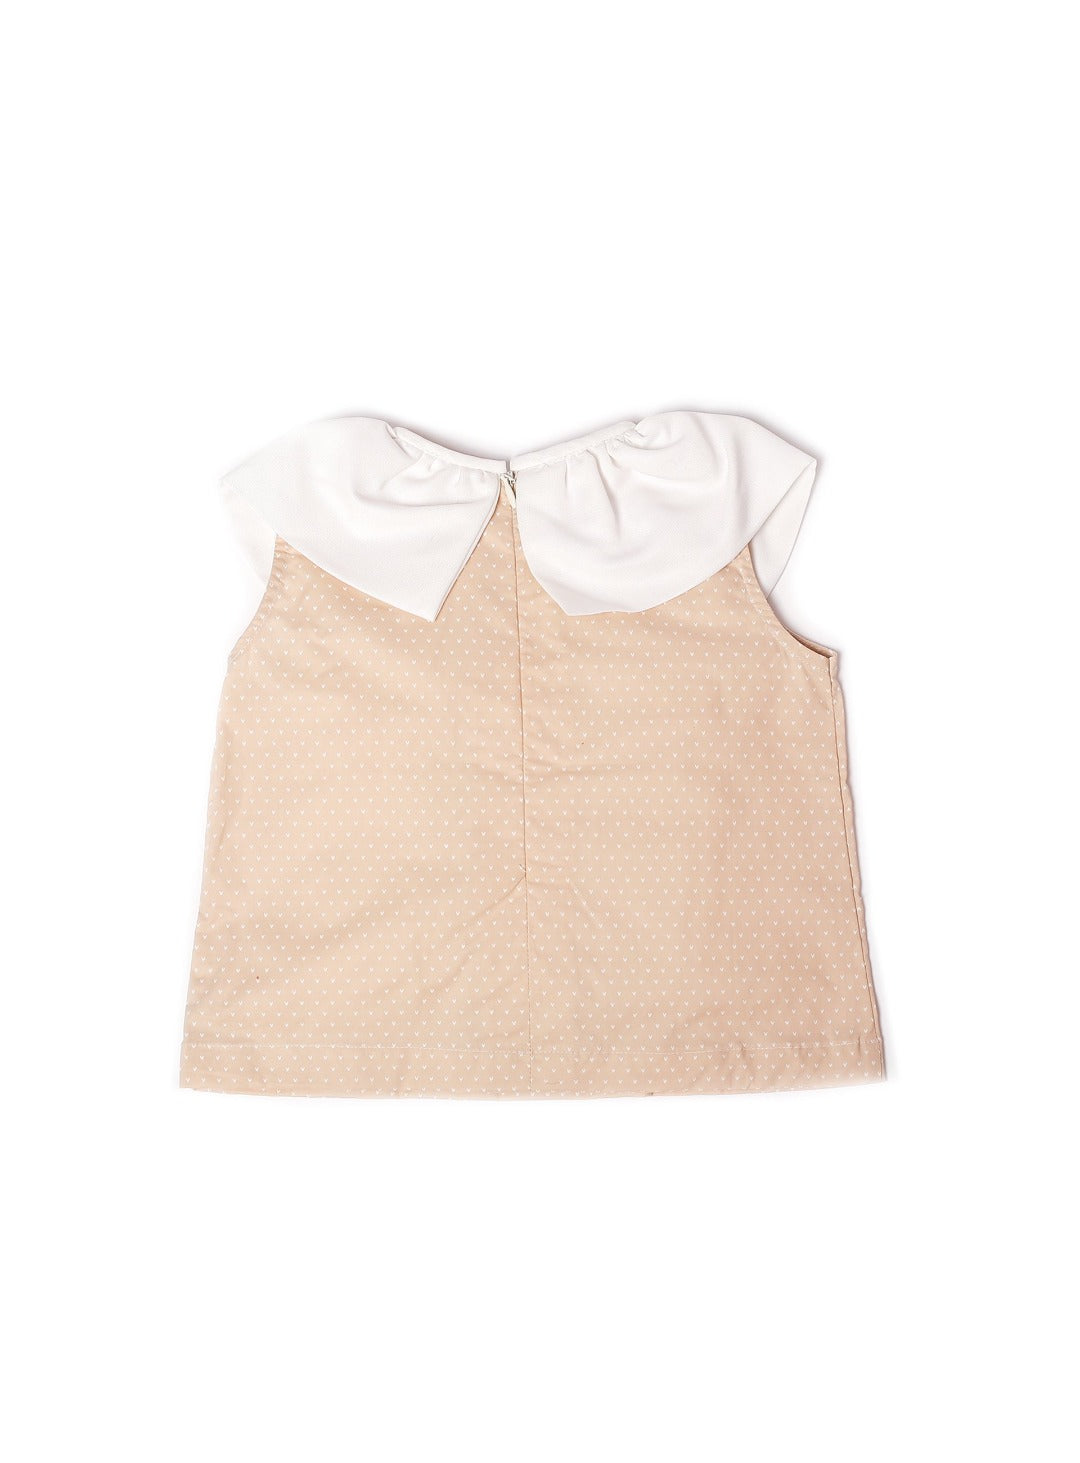 chocolate milk top with white frilled collar